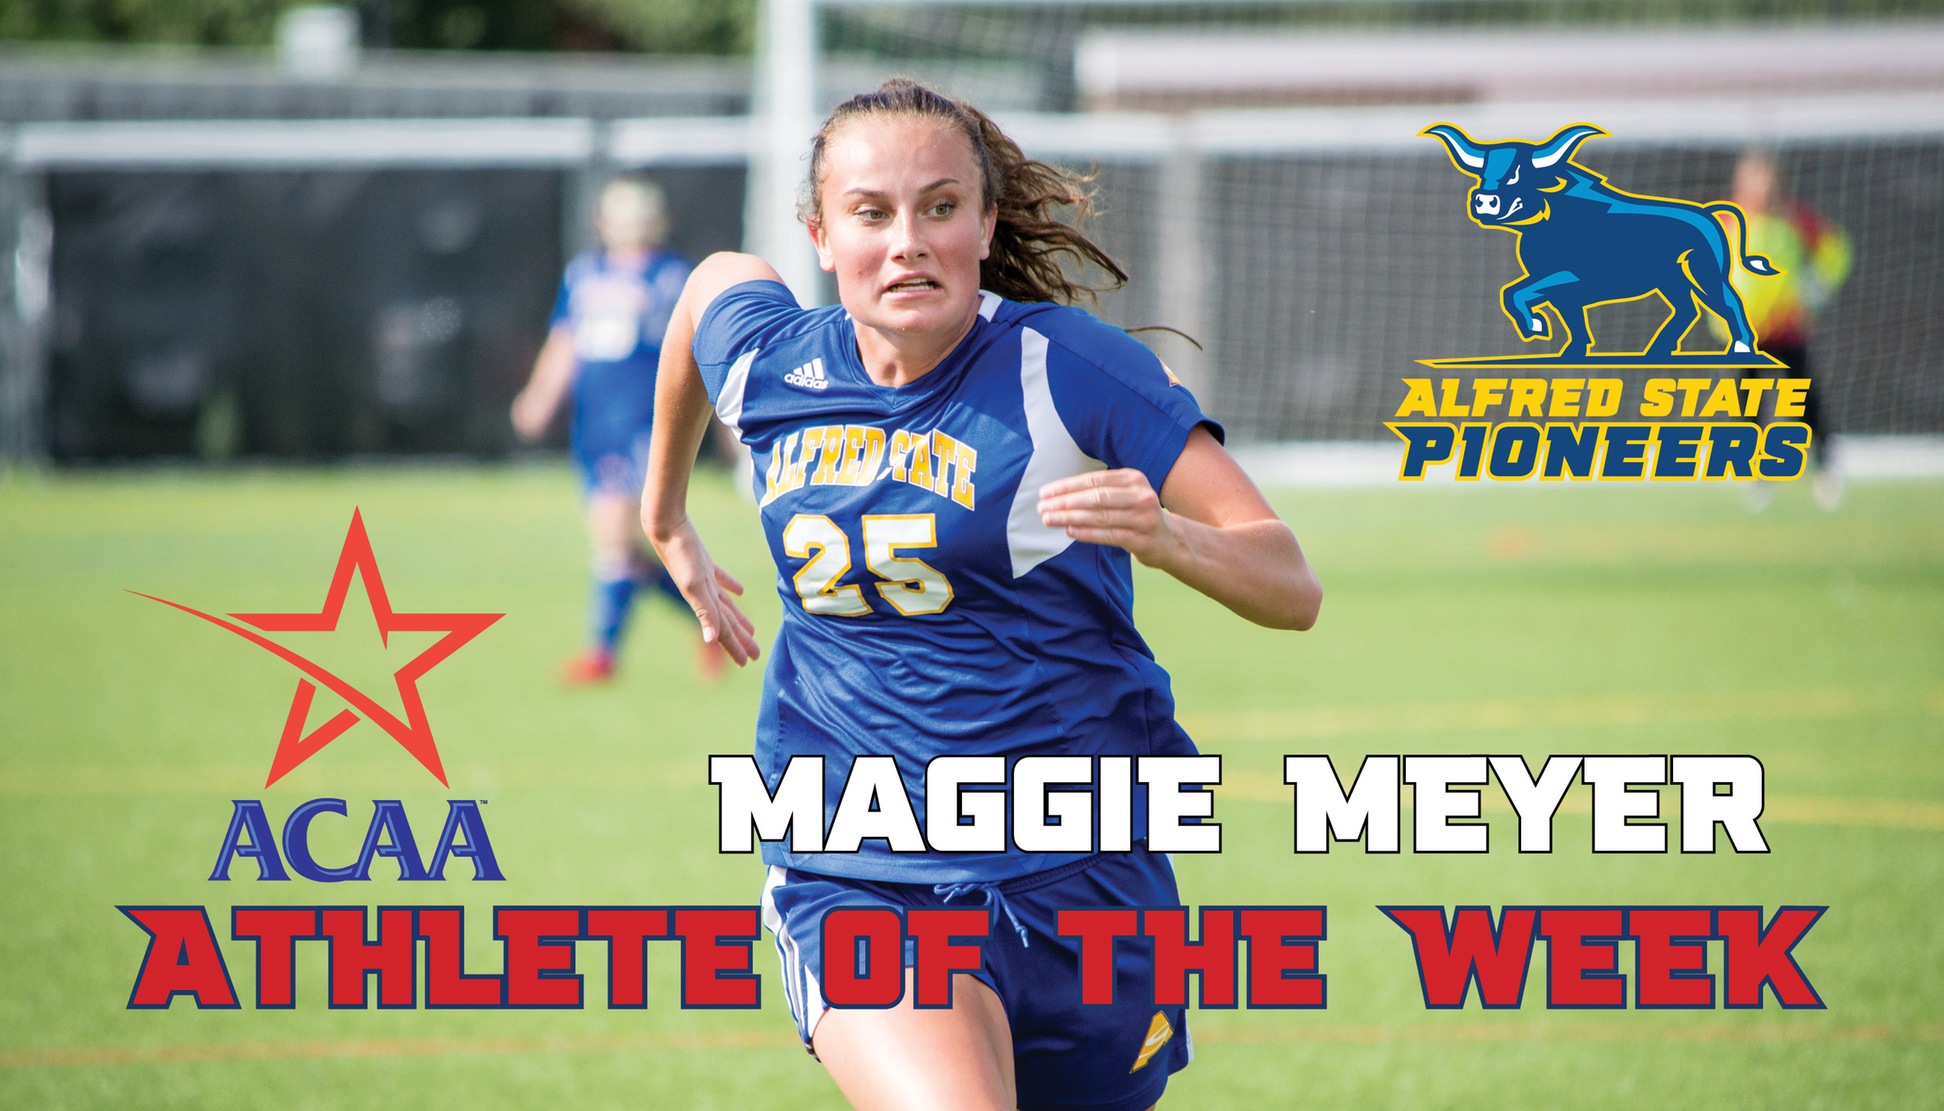 Maggie Meyer has been named the ACAA Athlete of the Week